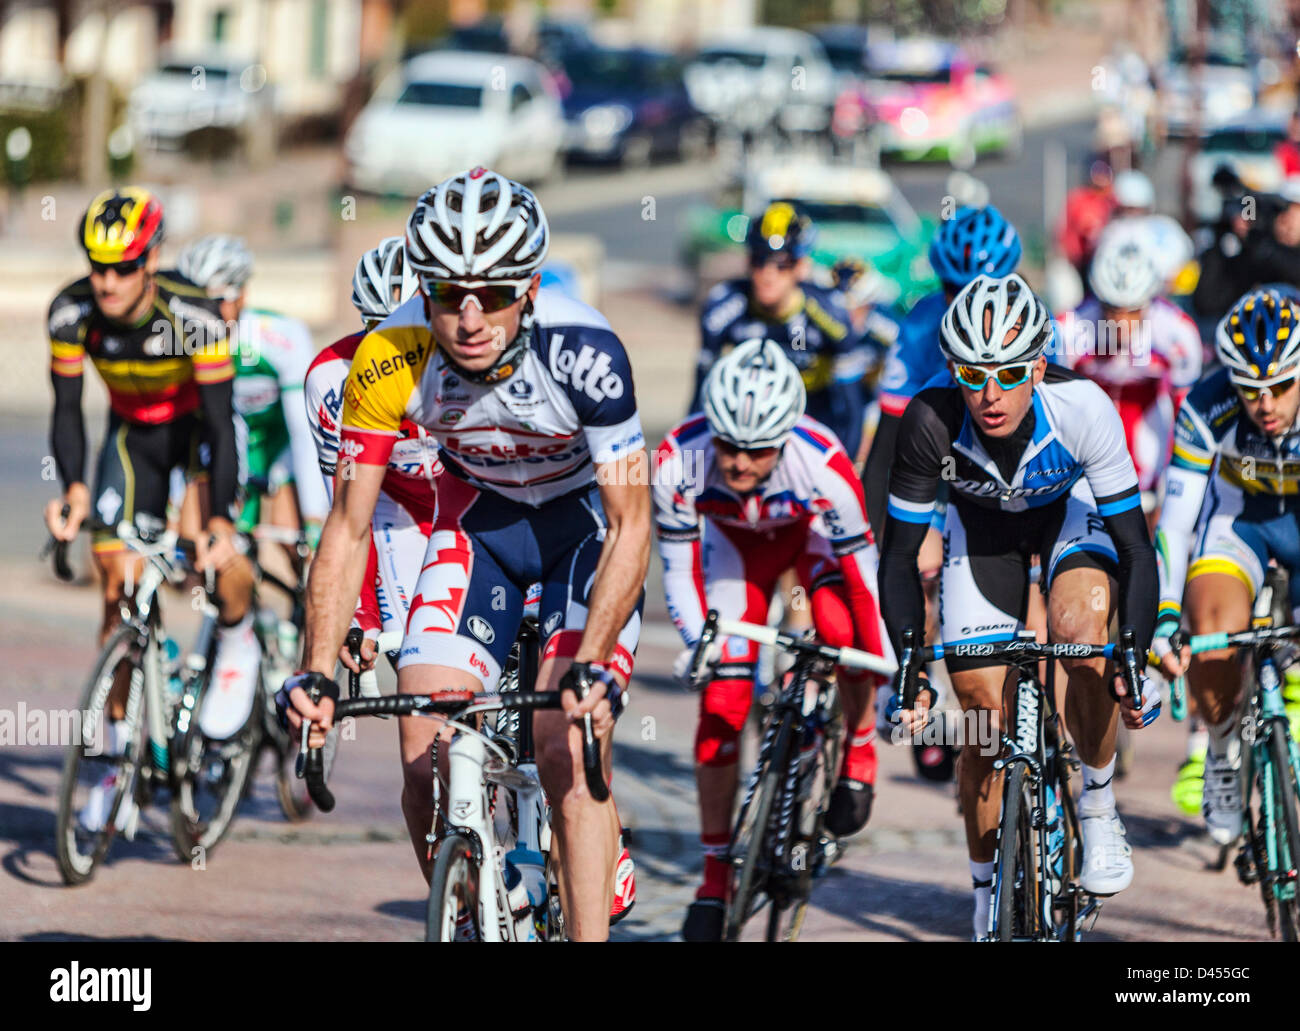 Saint-Pierre-lès-Nemours, France. 4th March 2013.  Image of the peloton riding  during the first stage of the famous road bicycle race Paris-Nice, on March 4, 2013 in Saint-Pierre-lès-Nemours. Credit:  Radu Razvan / Alamy Live News Stock Photo